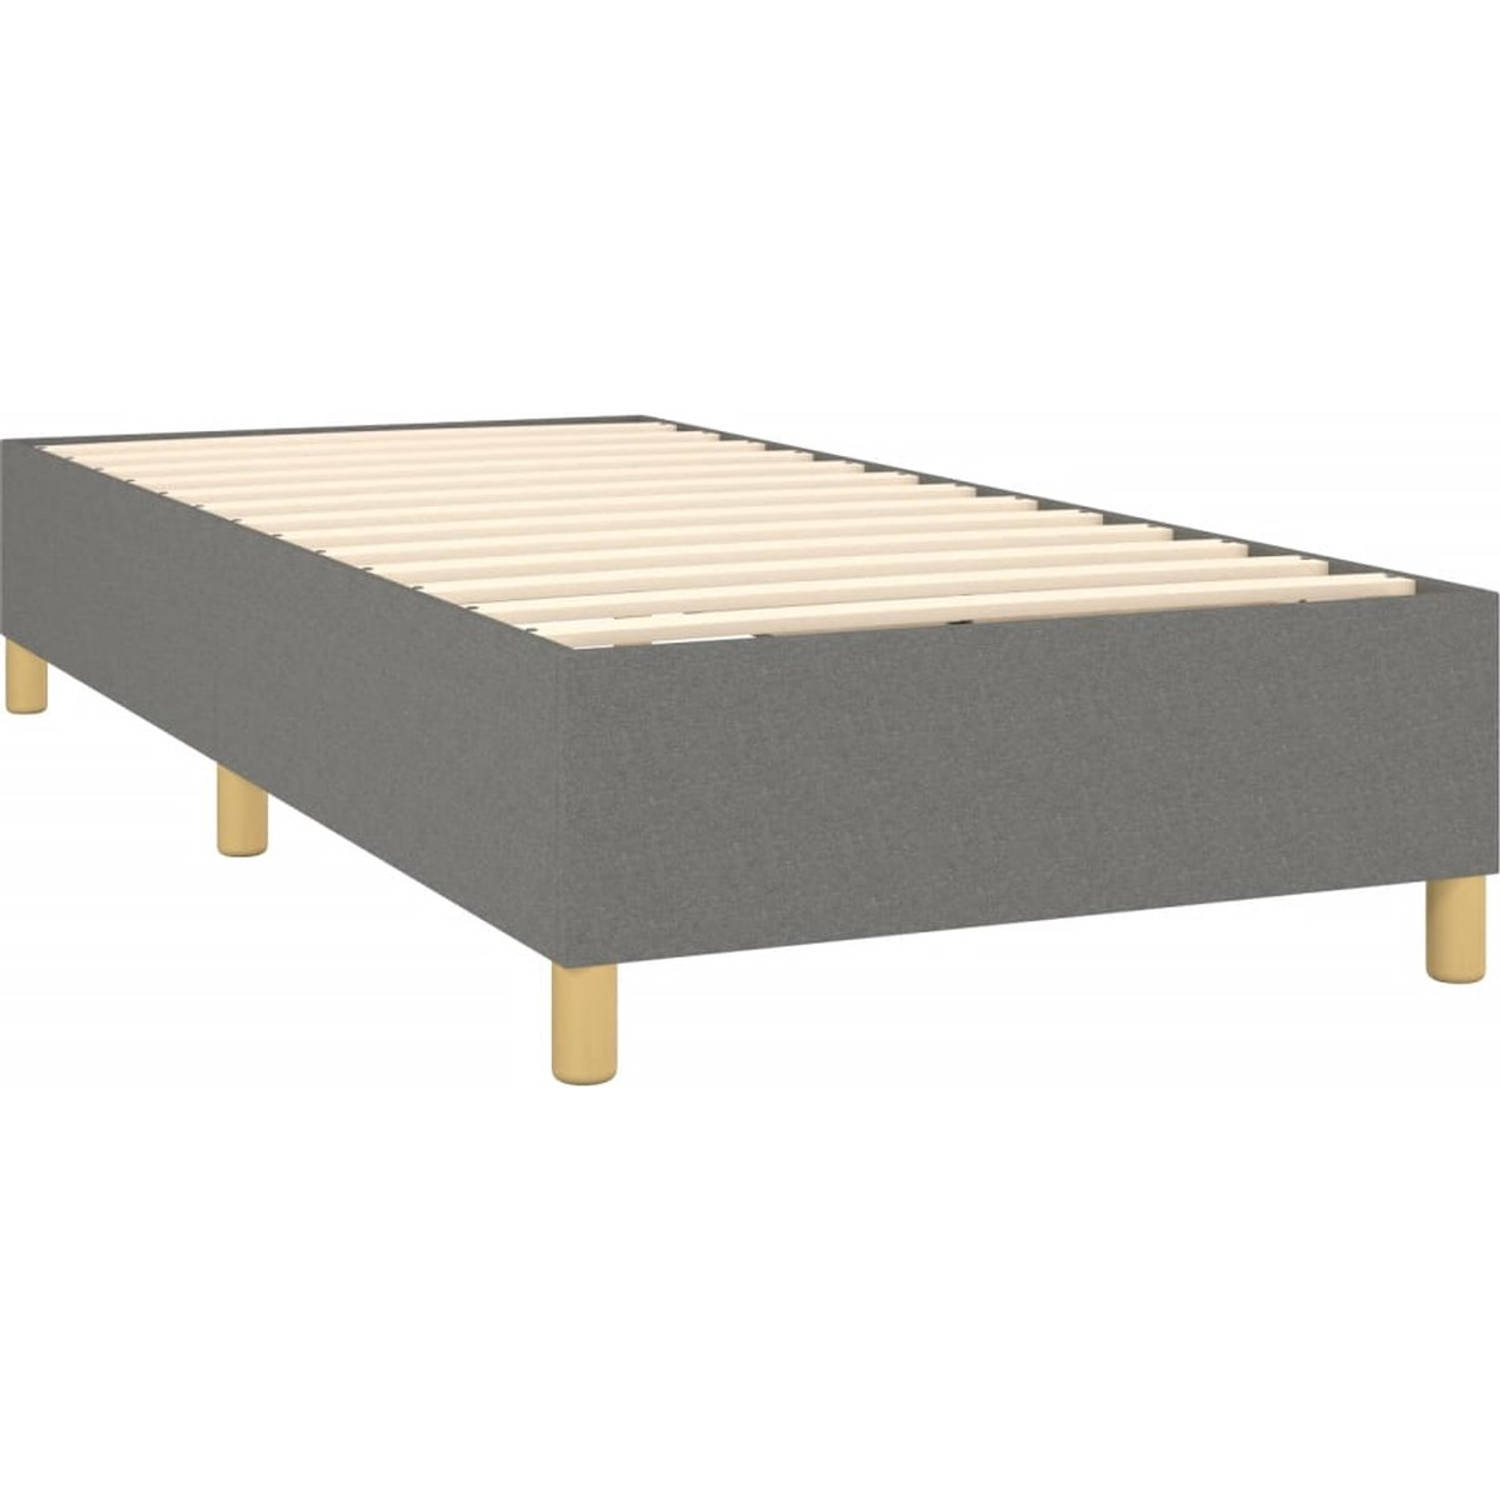 The Living Store Boxspringbed - Comfort - Bed - 203 x 83 x 118/128 cm - Donkergrijs - Stof - Pocketvering matras - 80